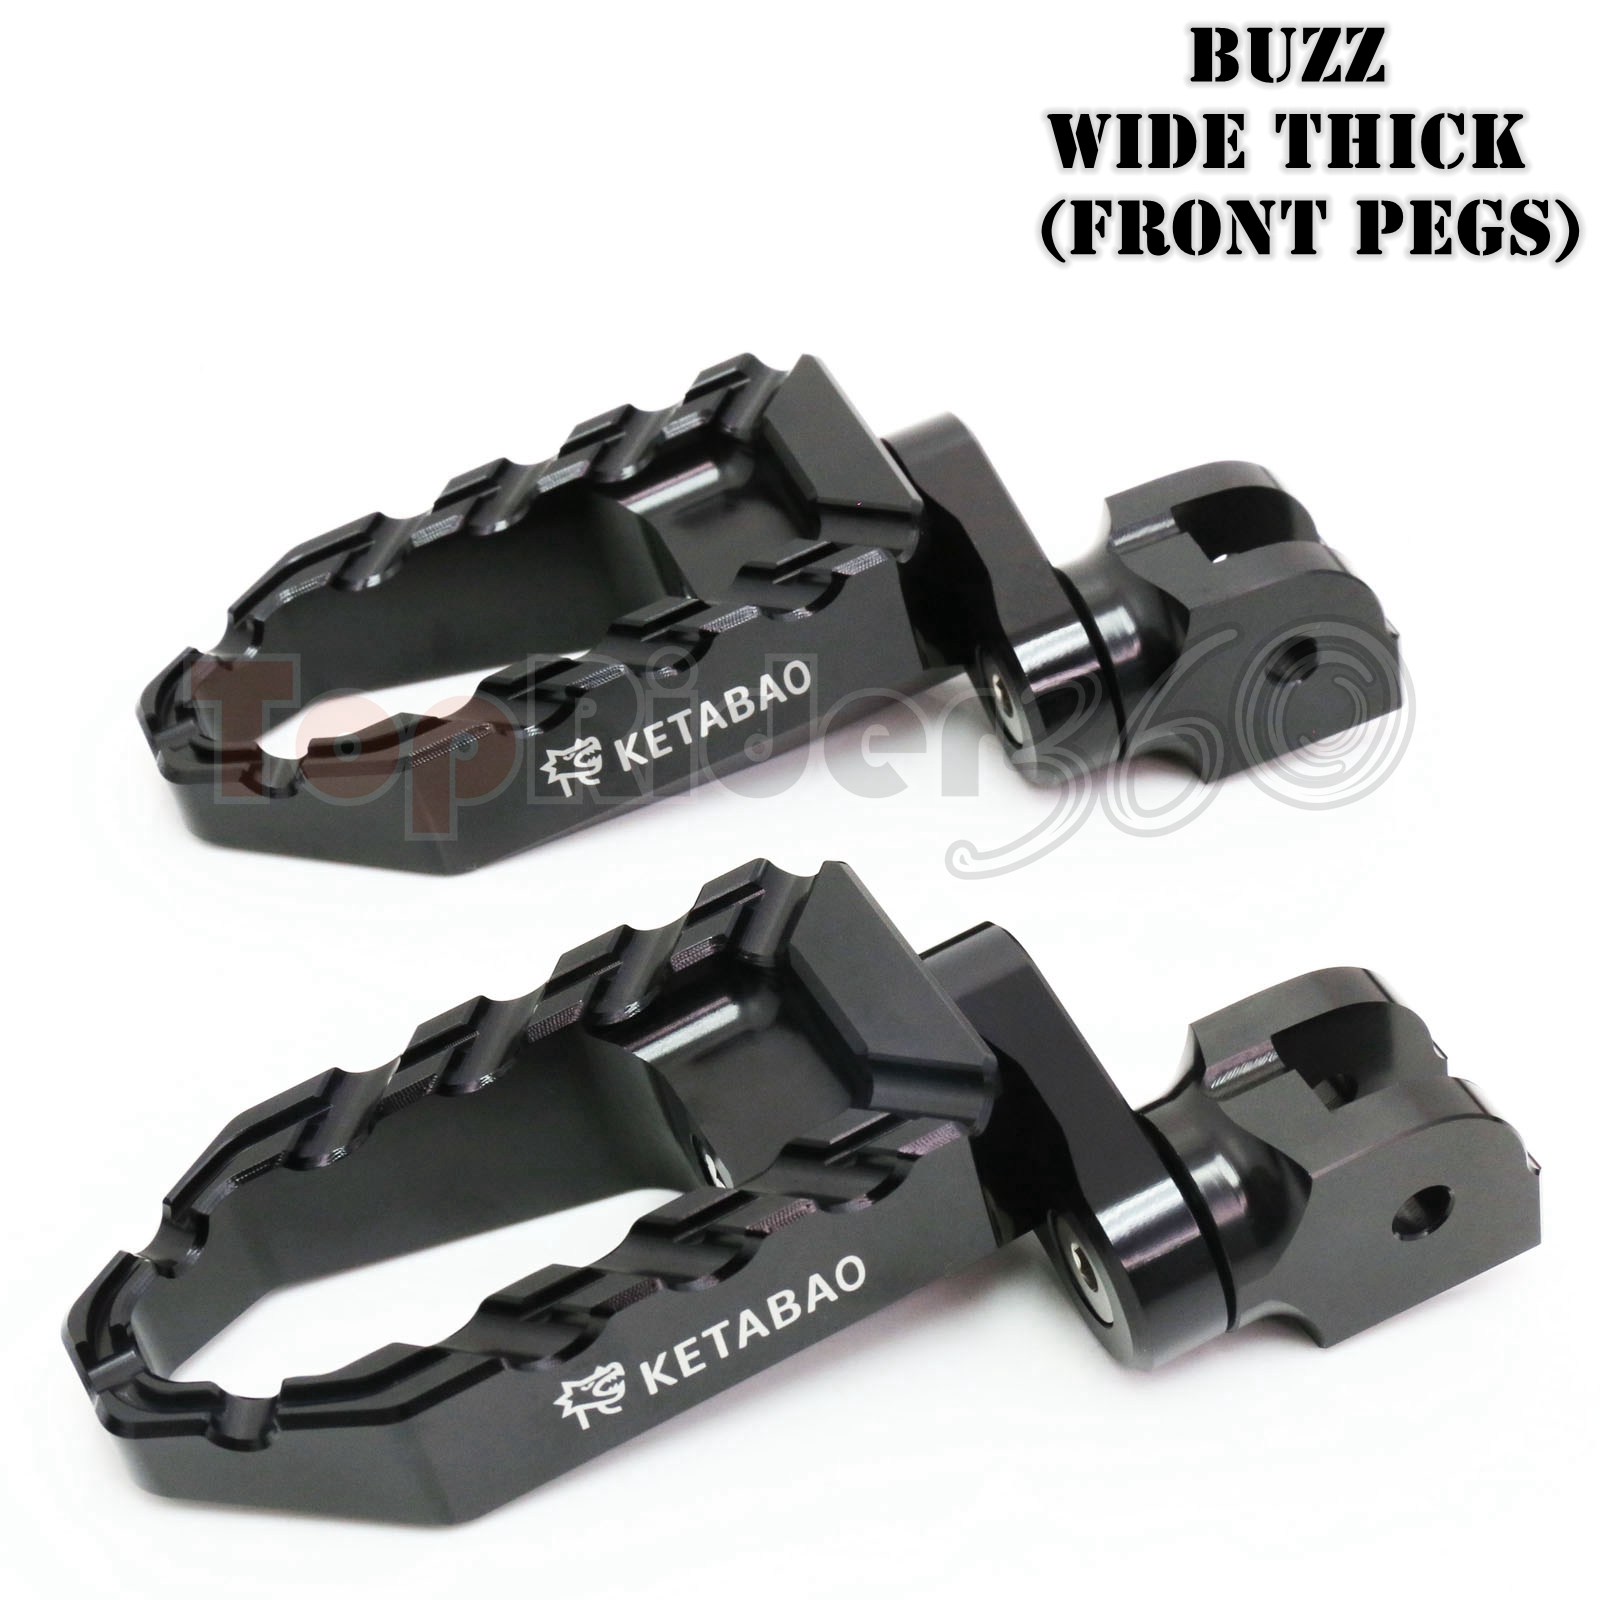 Black 25mm Lowering Front Large Foot Pegs For Aprilia Shiver 900 Mana 850 SL750